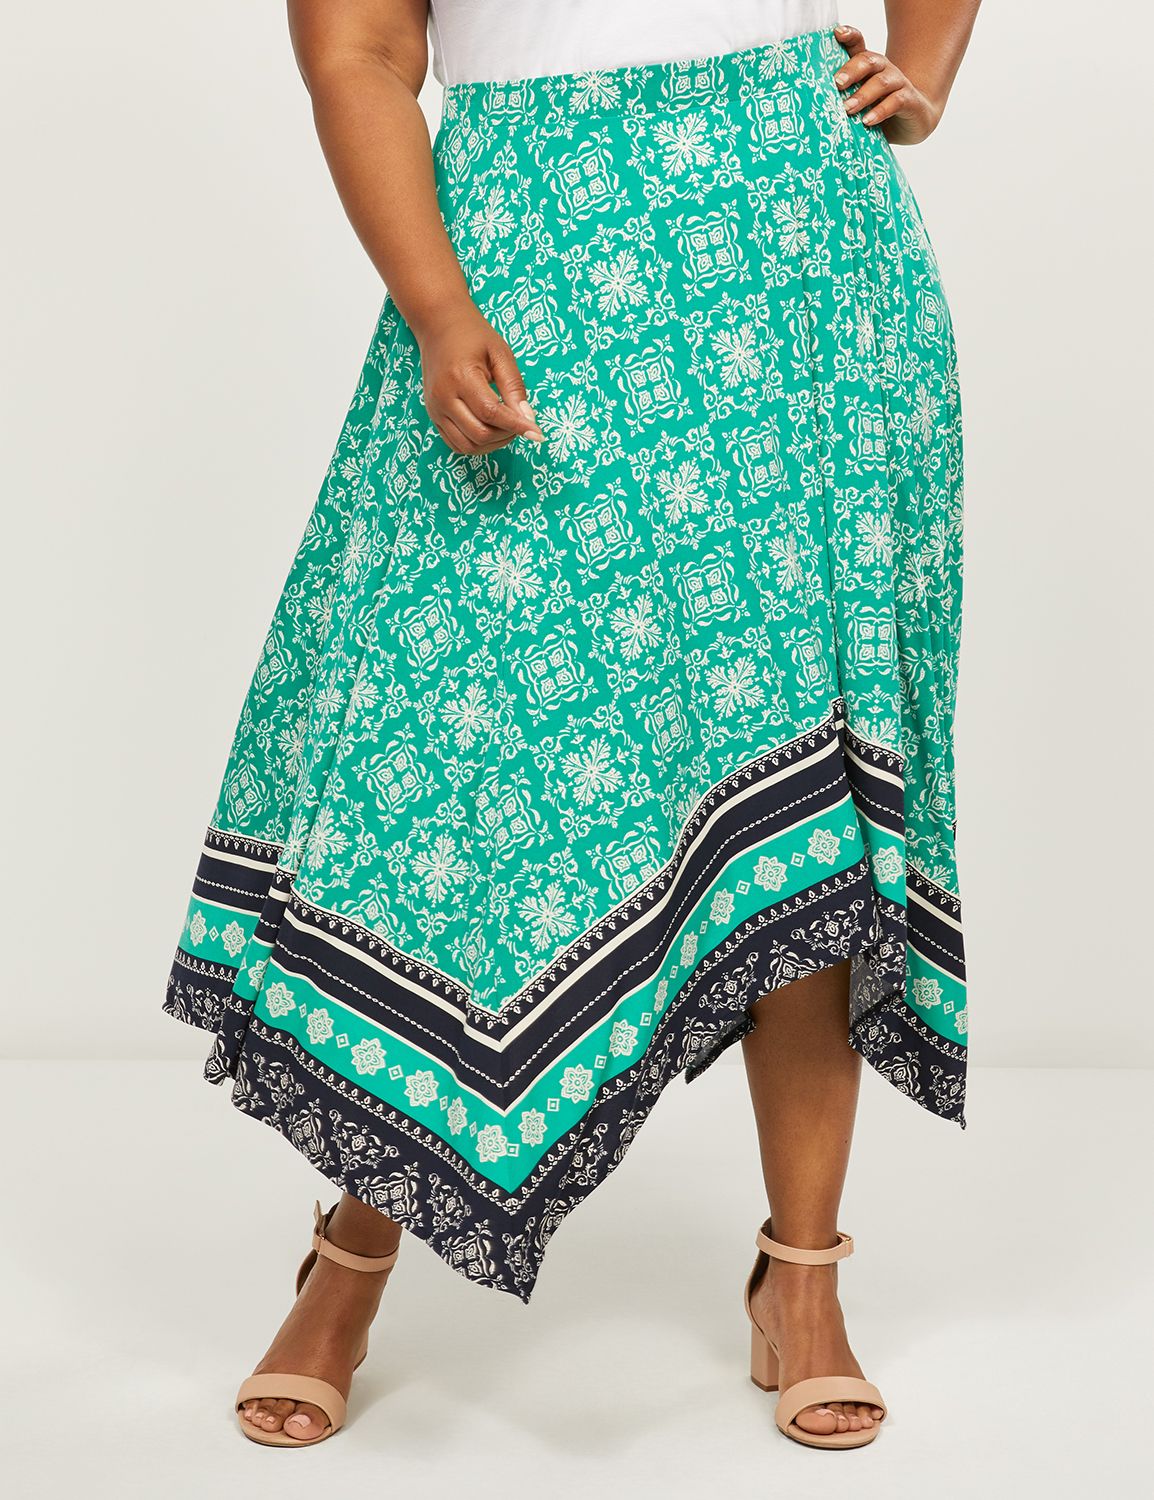 Clearance Plus Size Dresses & Skirts - On Sale Today | Lane Bryant